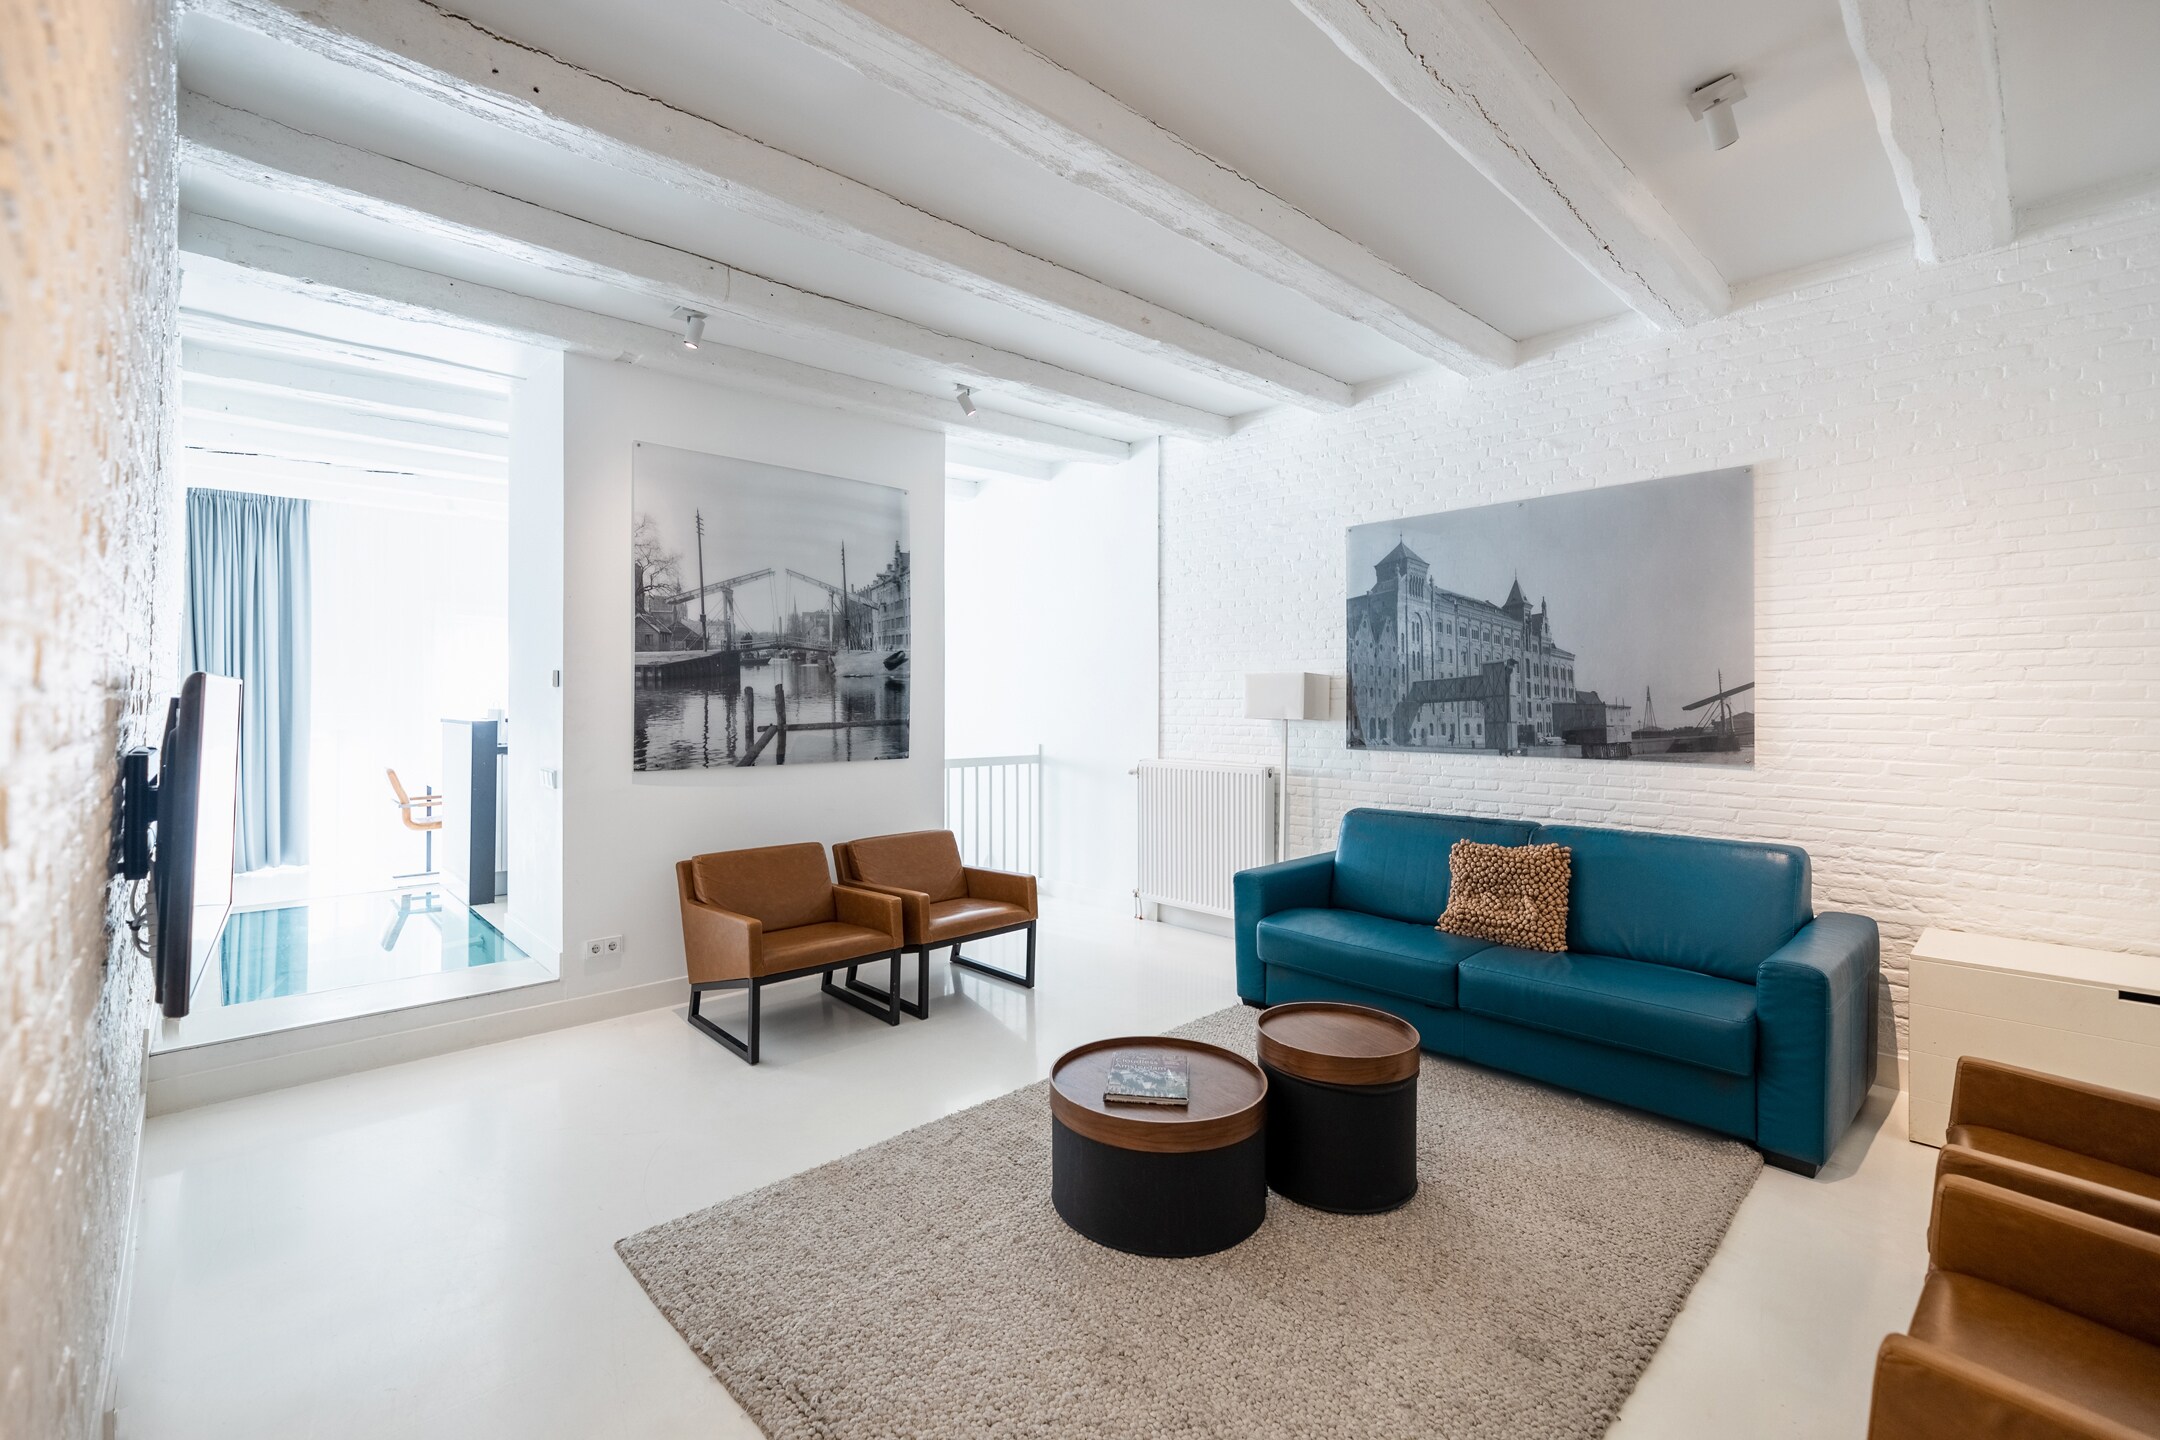 Elegant two-bedroom family apartment with an unforgettable Amsterdam Canal view